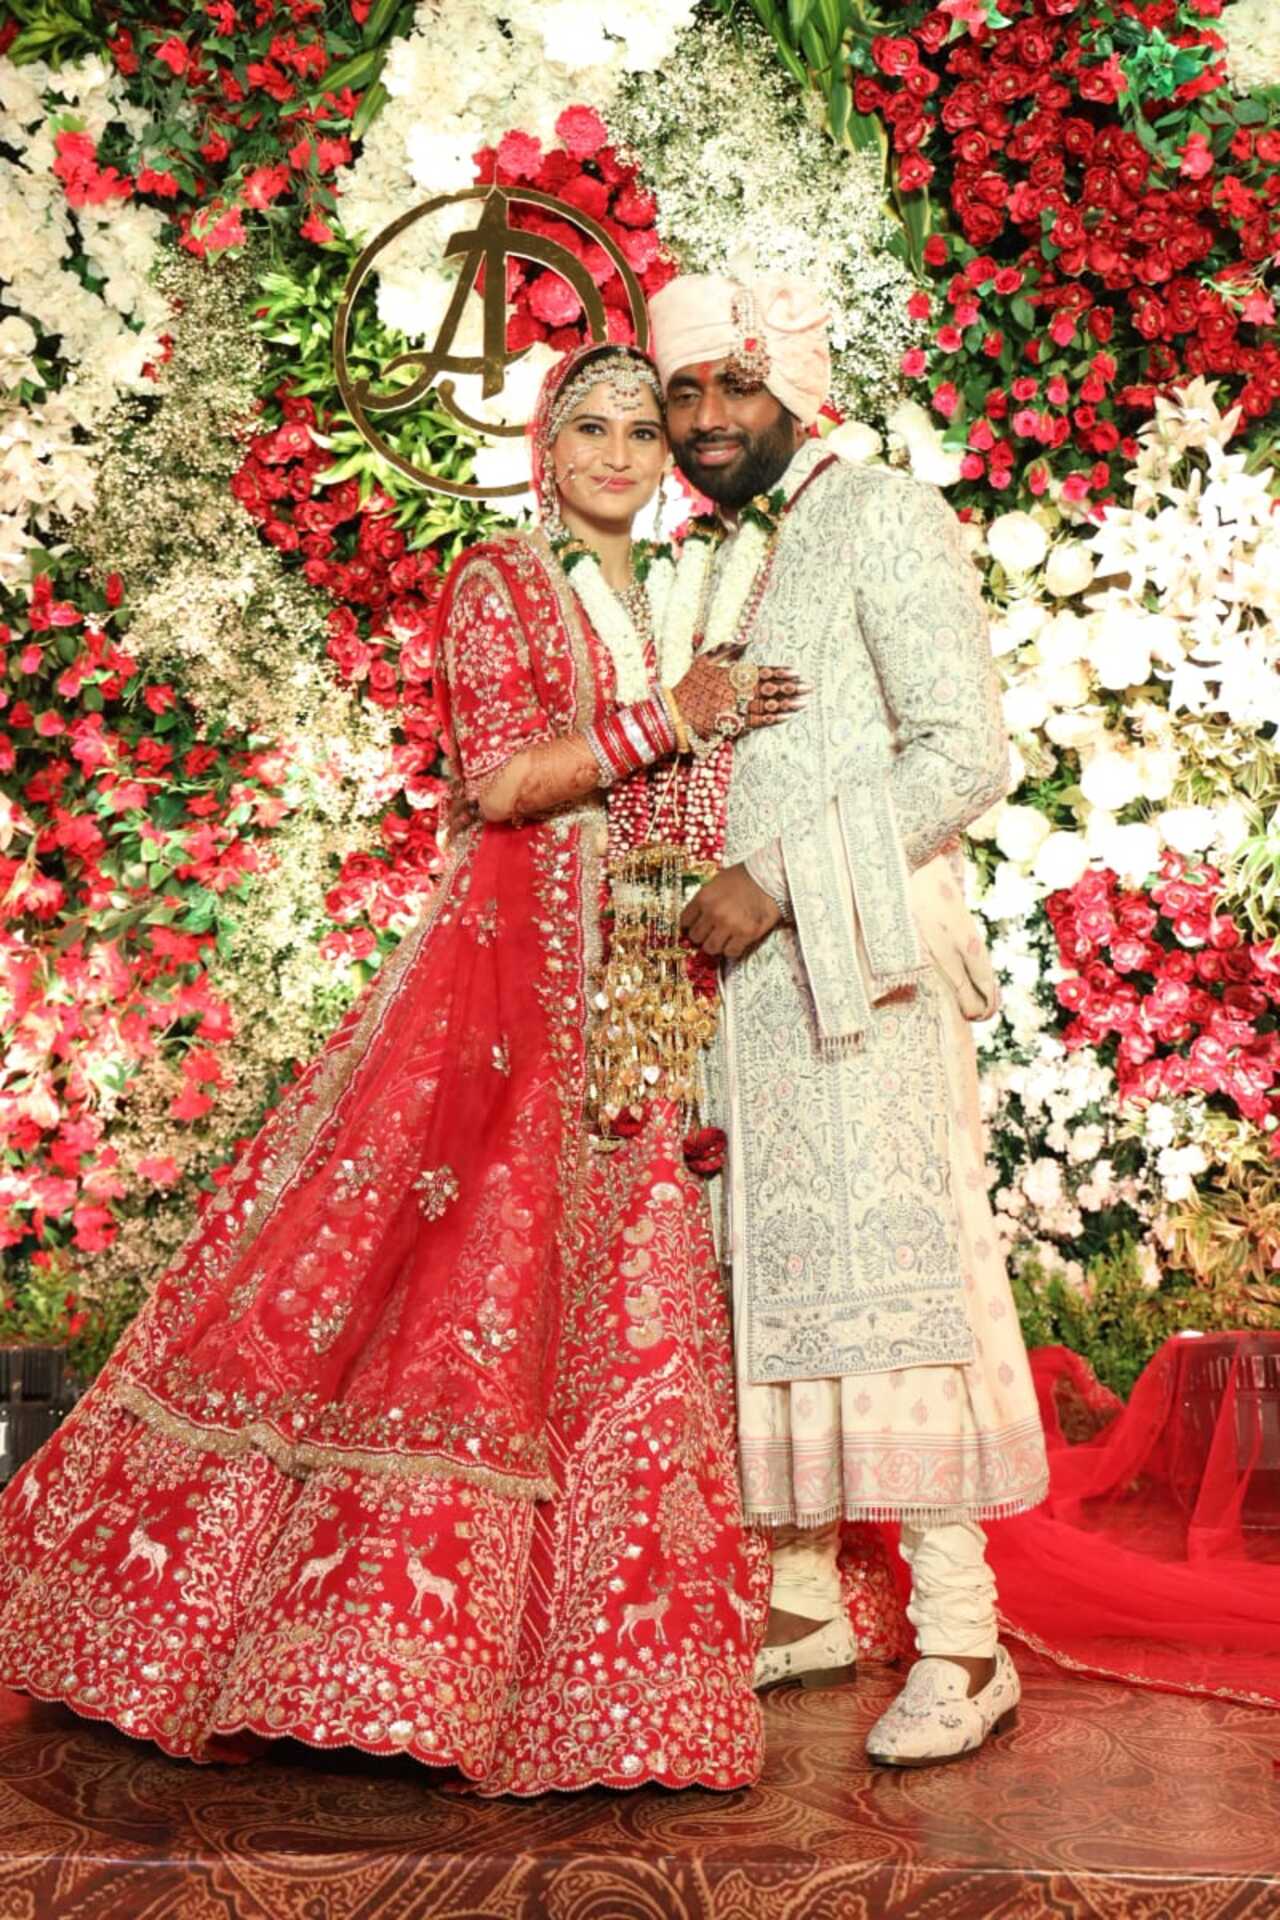 Newlyweds Arti Singh and Dipak Chauhan pose for the paparazzi after their phera ceremony